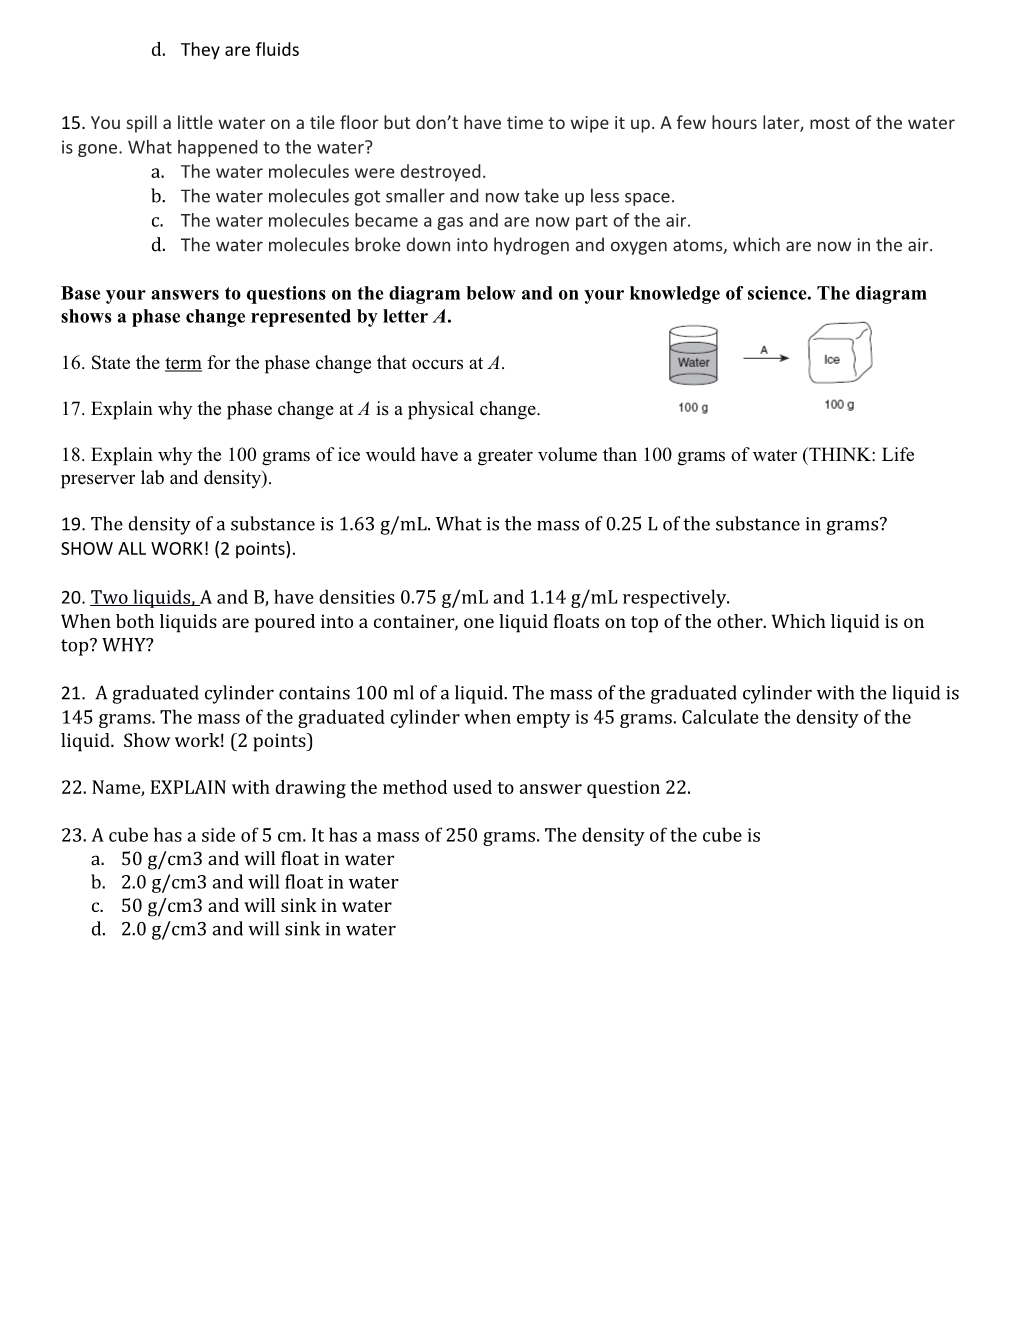 Matter Quiz 1.1 - States of Matter and Phase Changes